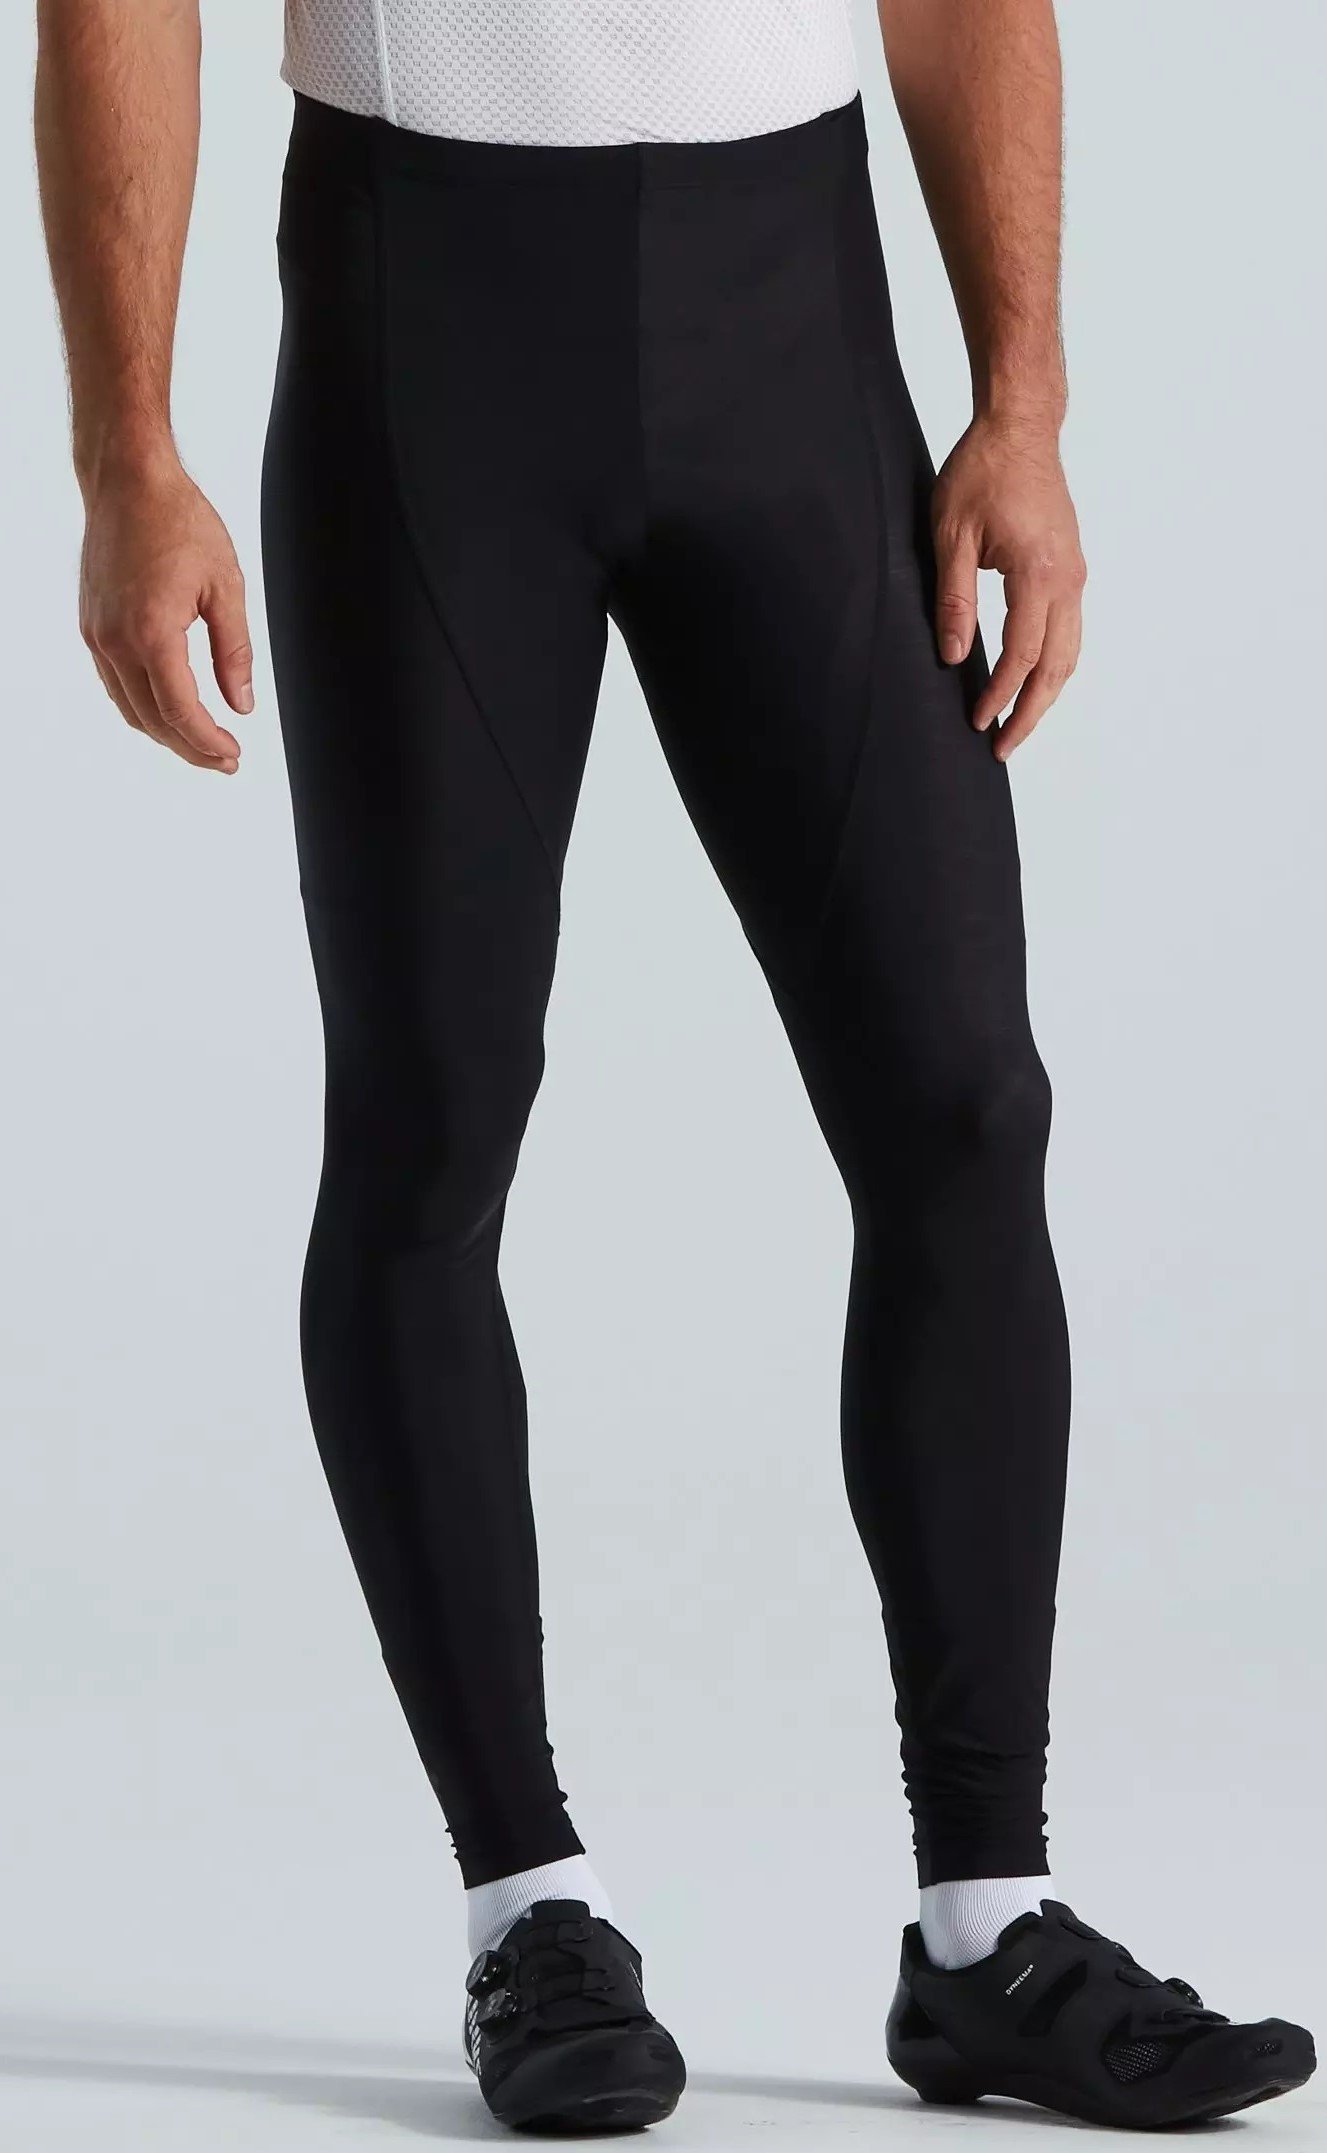 Specialized RBX Tights M